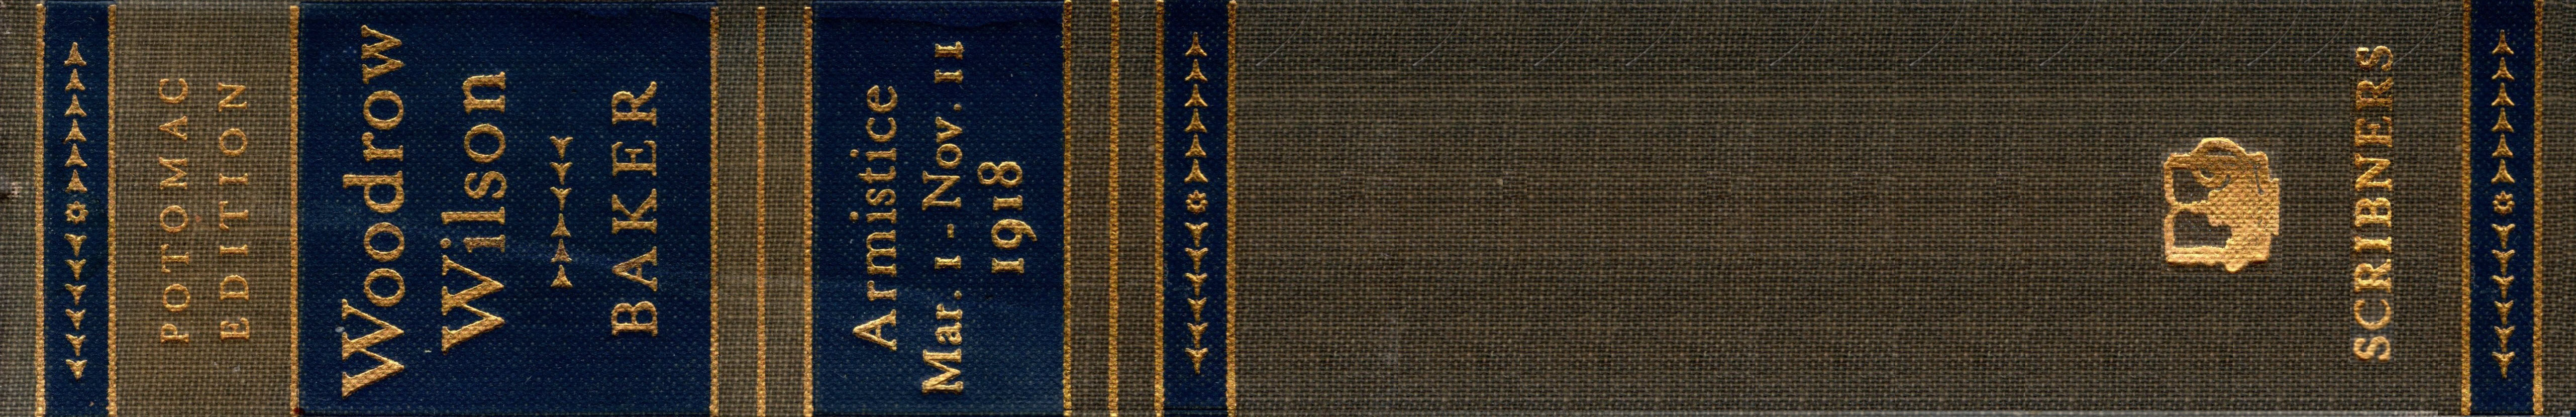 Image of the spine of Woodrow Wilson Life and Letters: Armistice - 1918